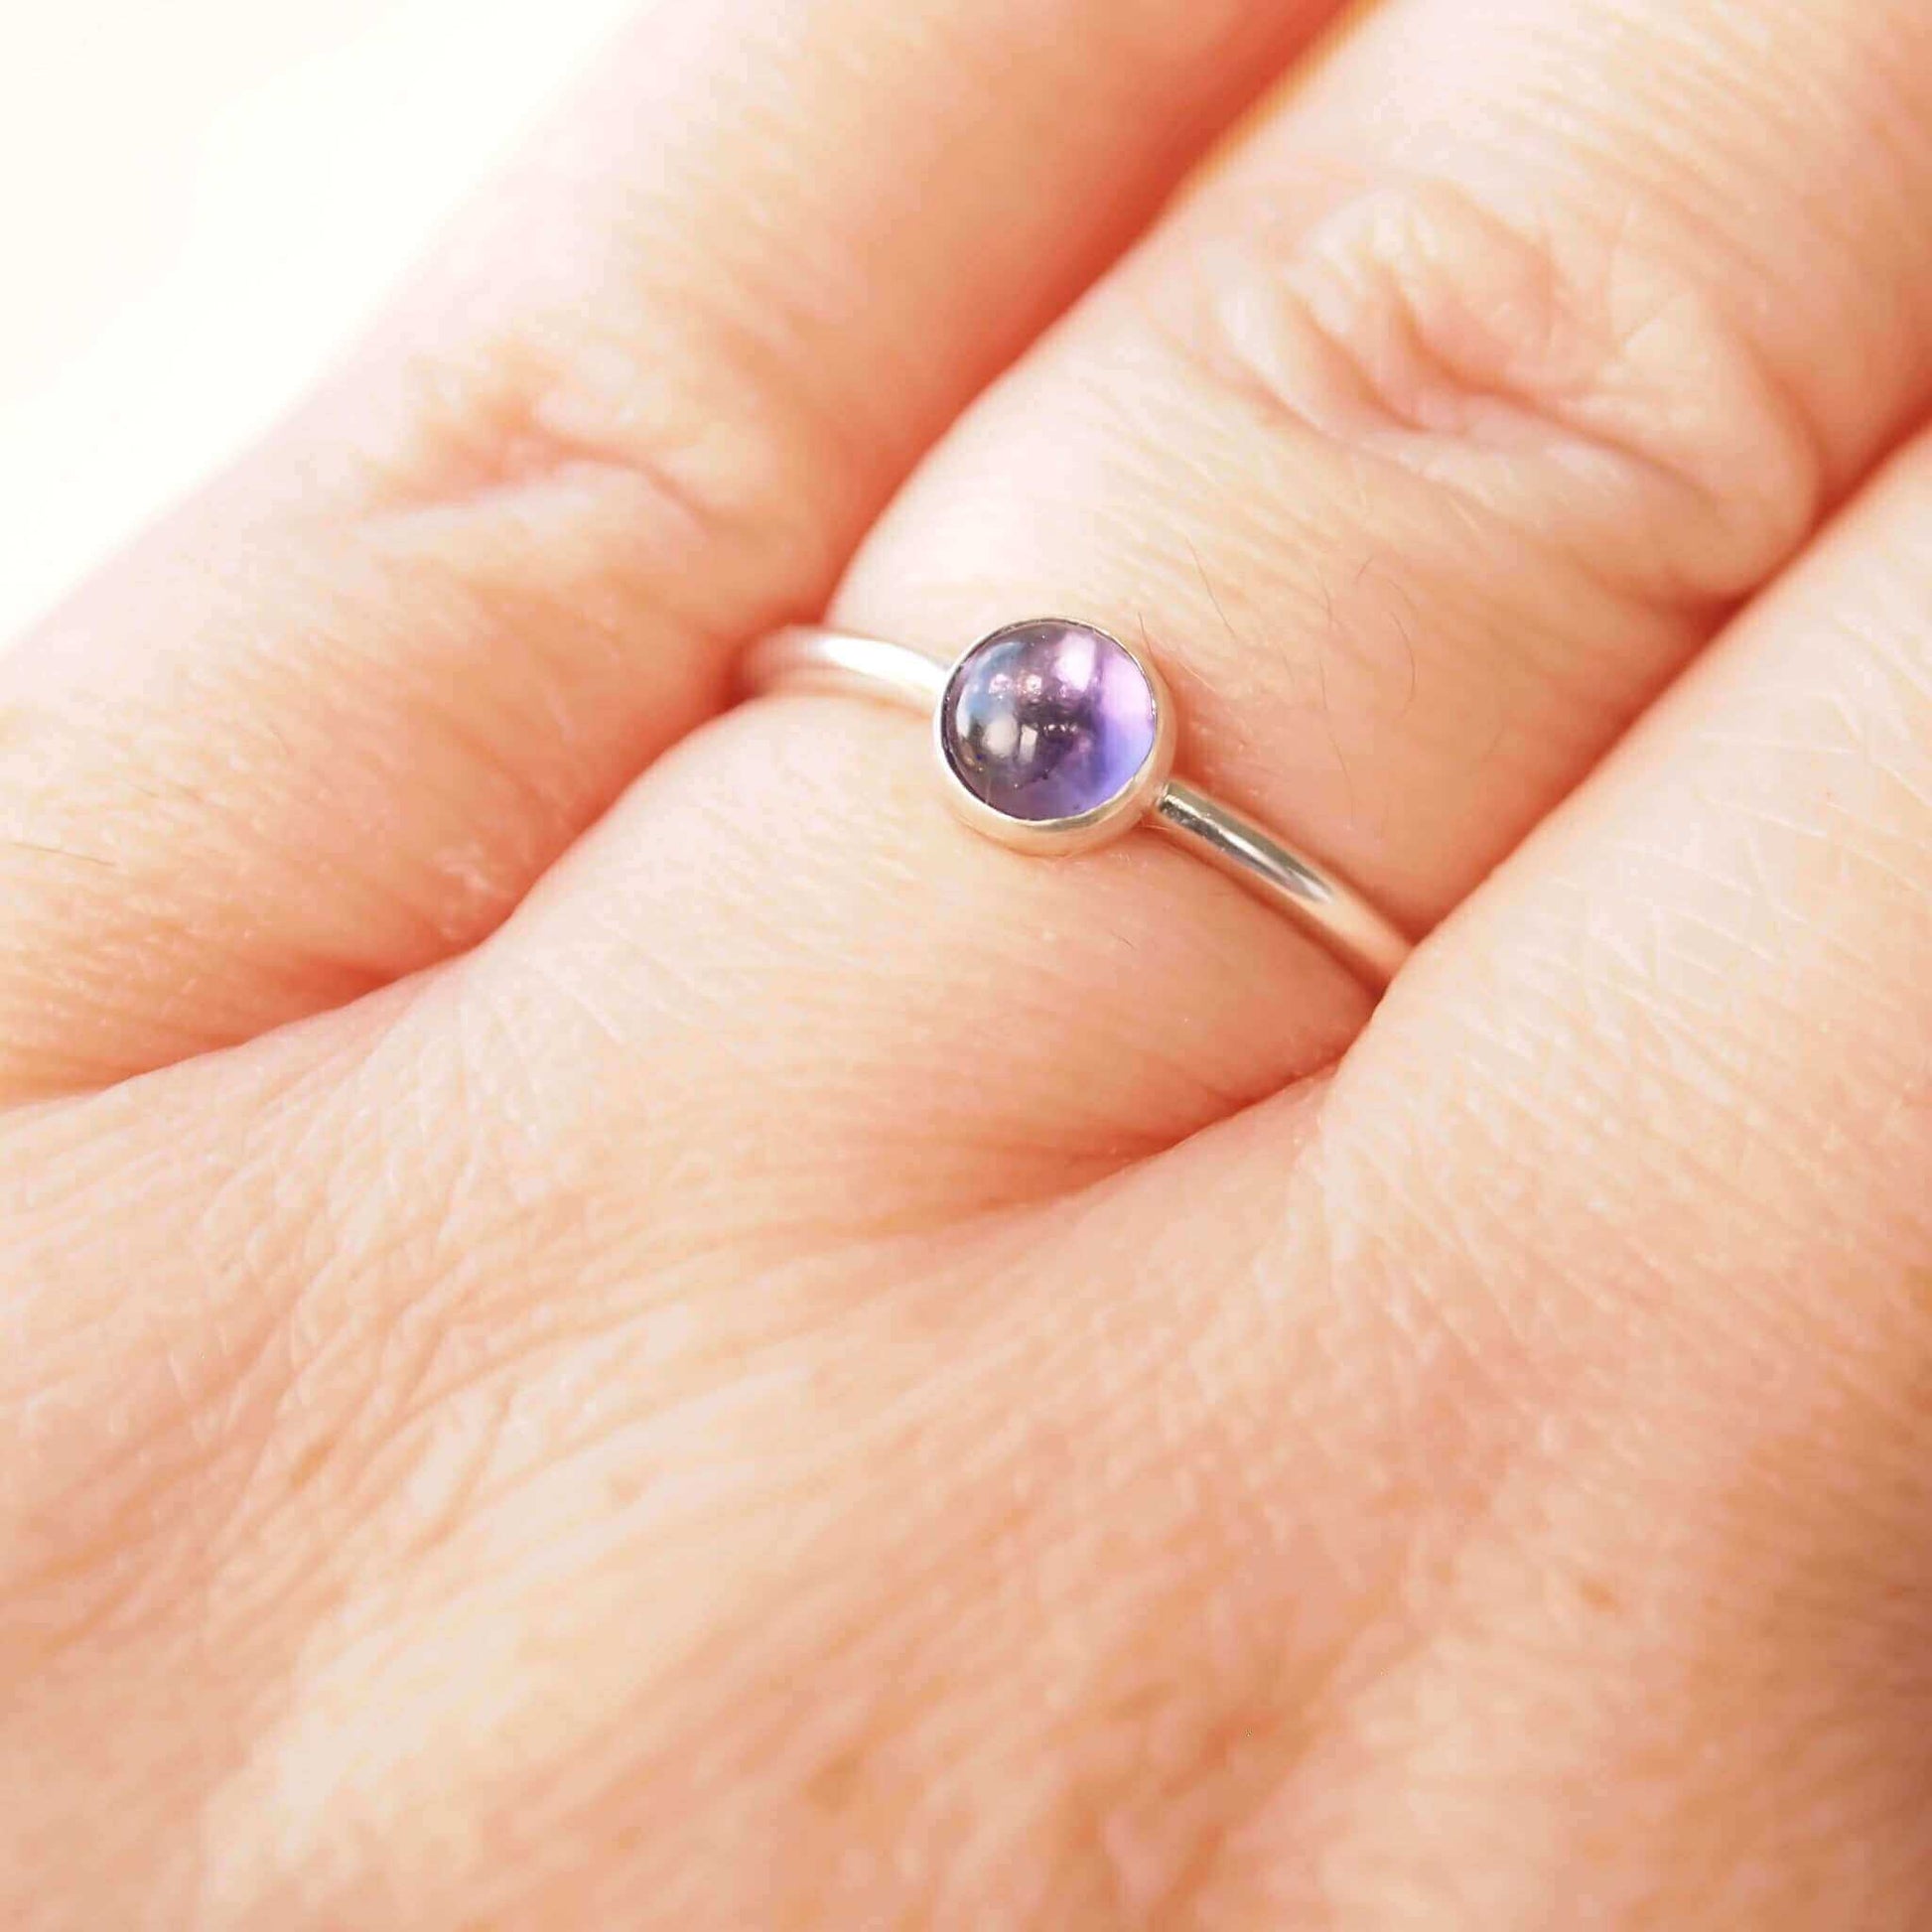 Simple Silver and Amethyst ring with a round 5mm Purple Amethyst, February's Birthstone. Handmade by Maram Jewellery in Scotland